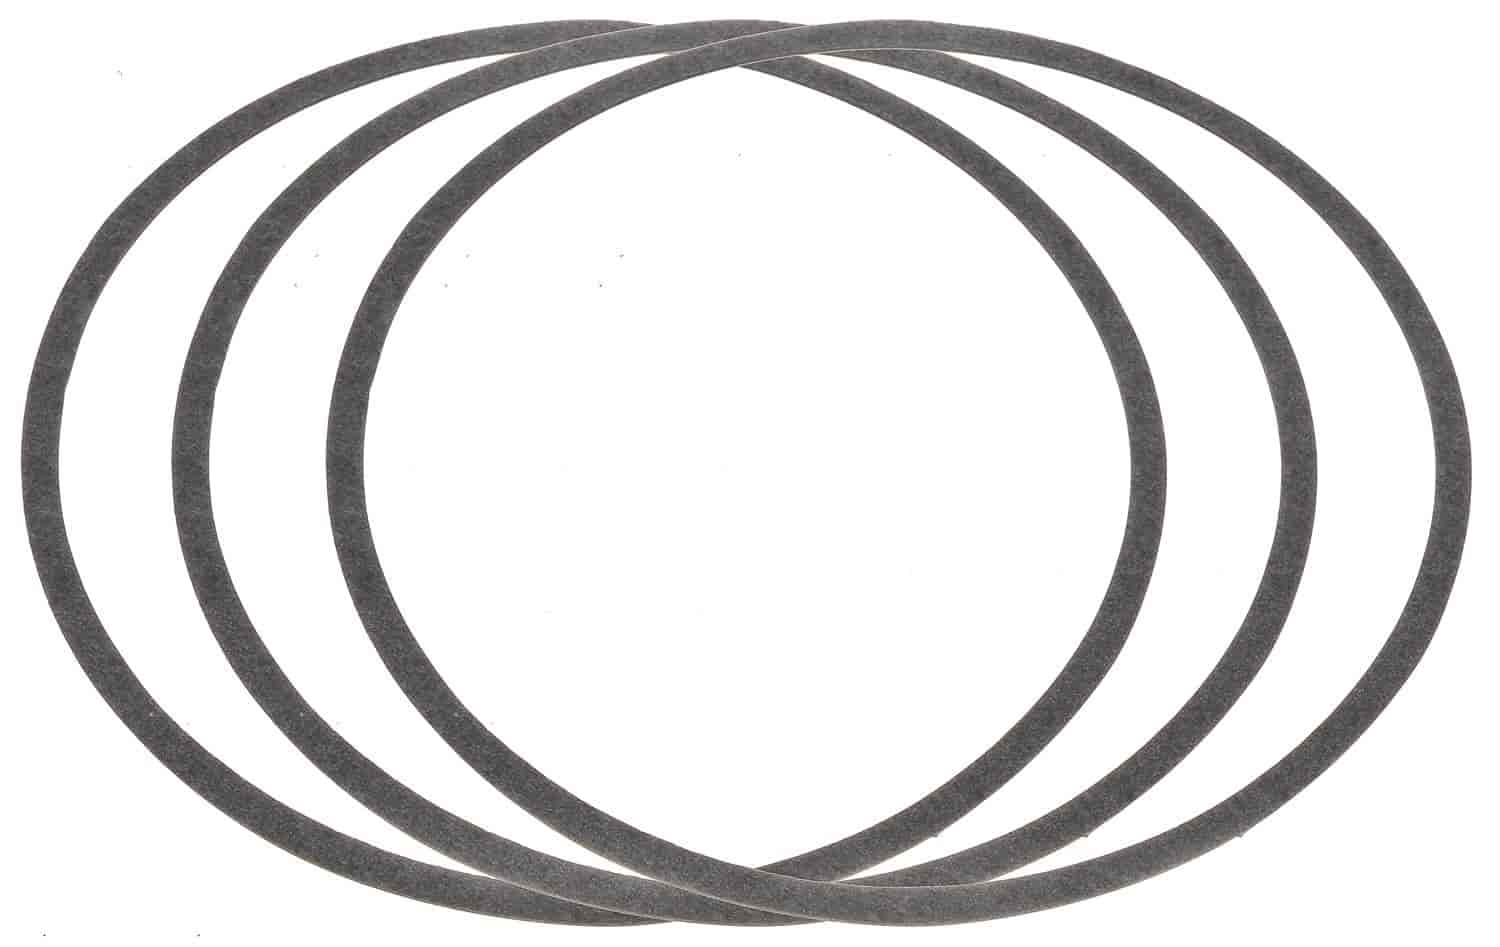 Air Cleaner Gaskets 7-5/16" I.D.